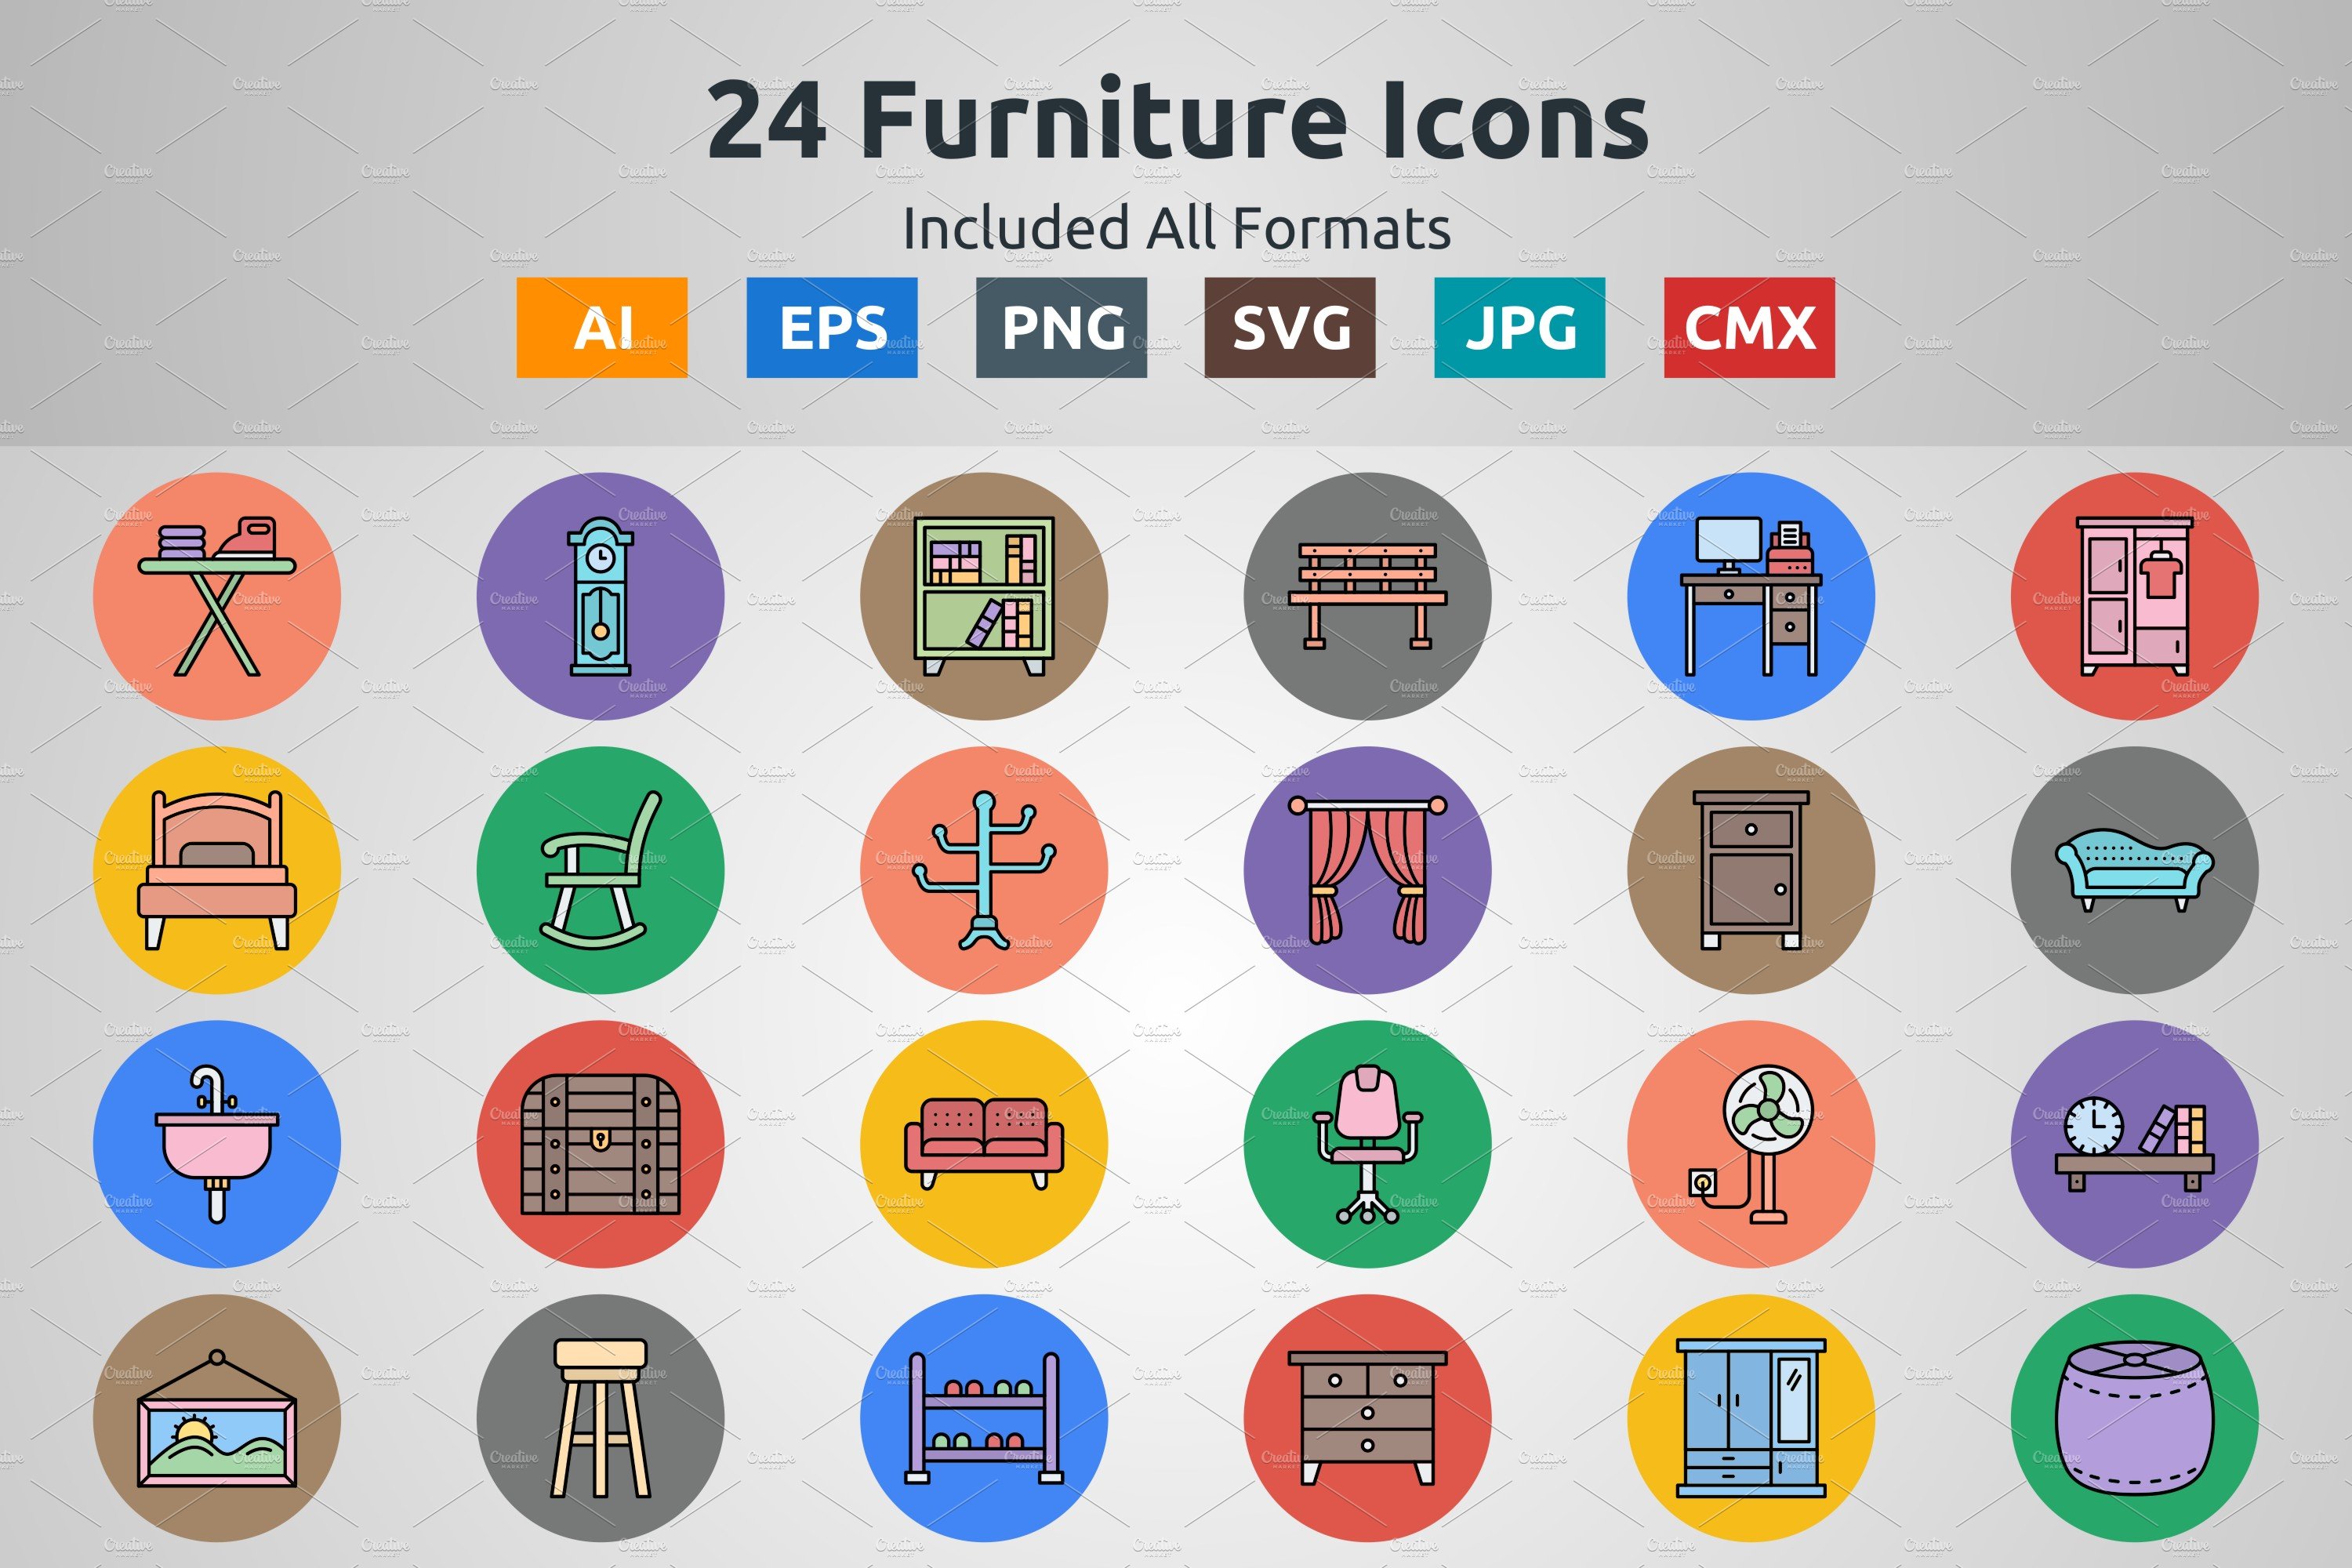 Line Filled Circle Icon of Furniture cover image.